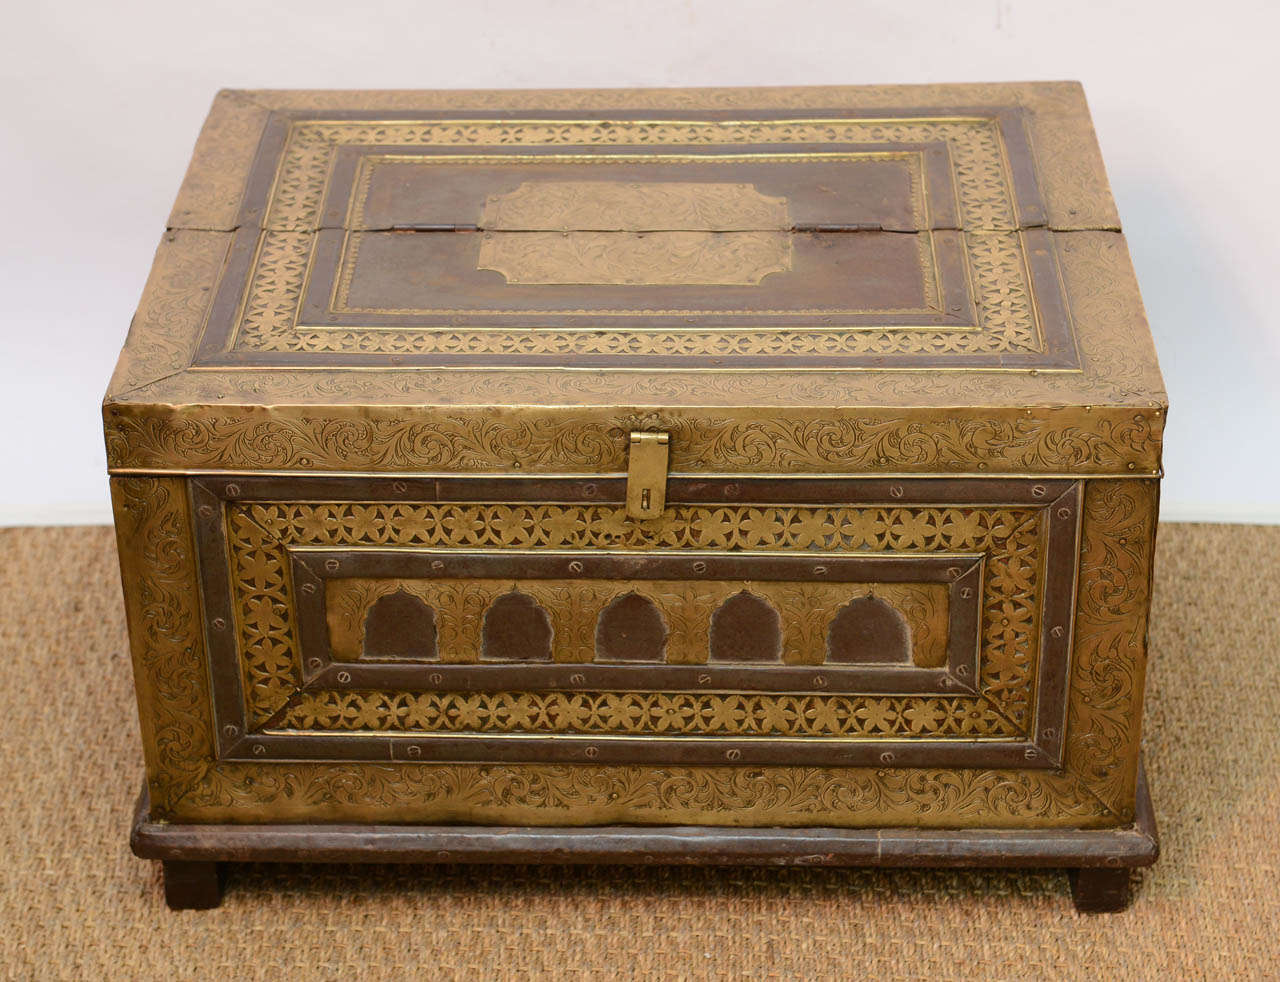 Original Antique 19th century large Moroccan chest. This large and sturdy wood chest  is adorned with very detailed repousse Brass all around. The workmanship is extraordinary. Brass handles at each side. The top opens half way. This chest stands on